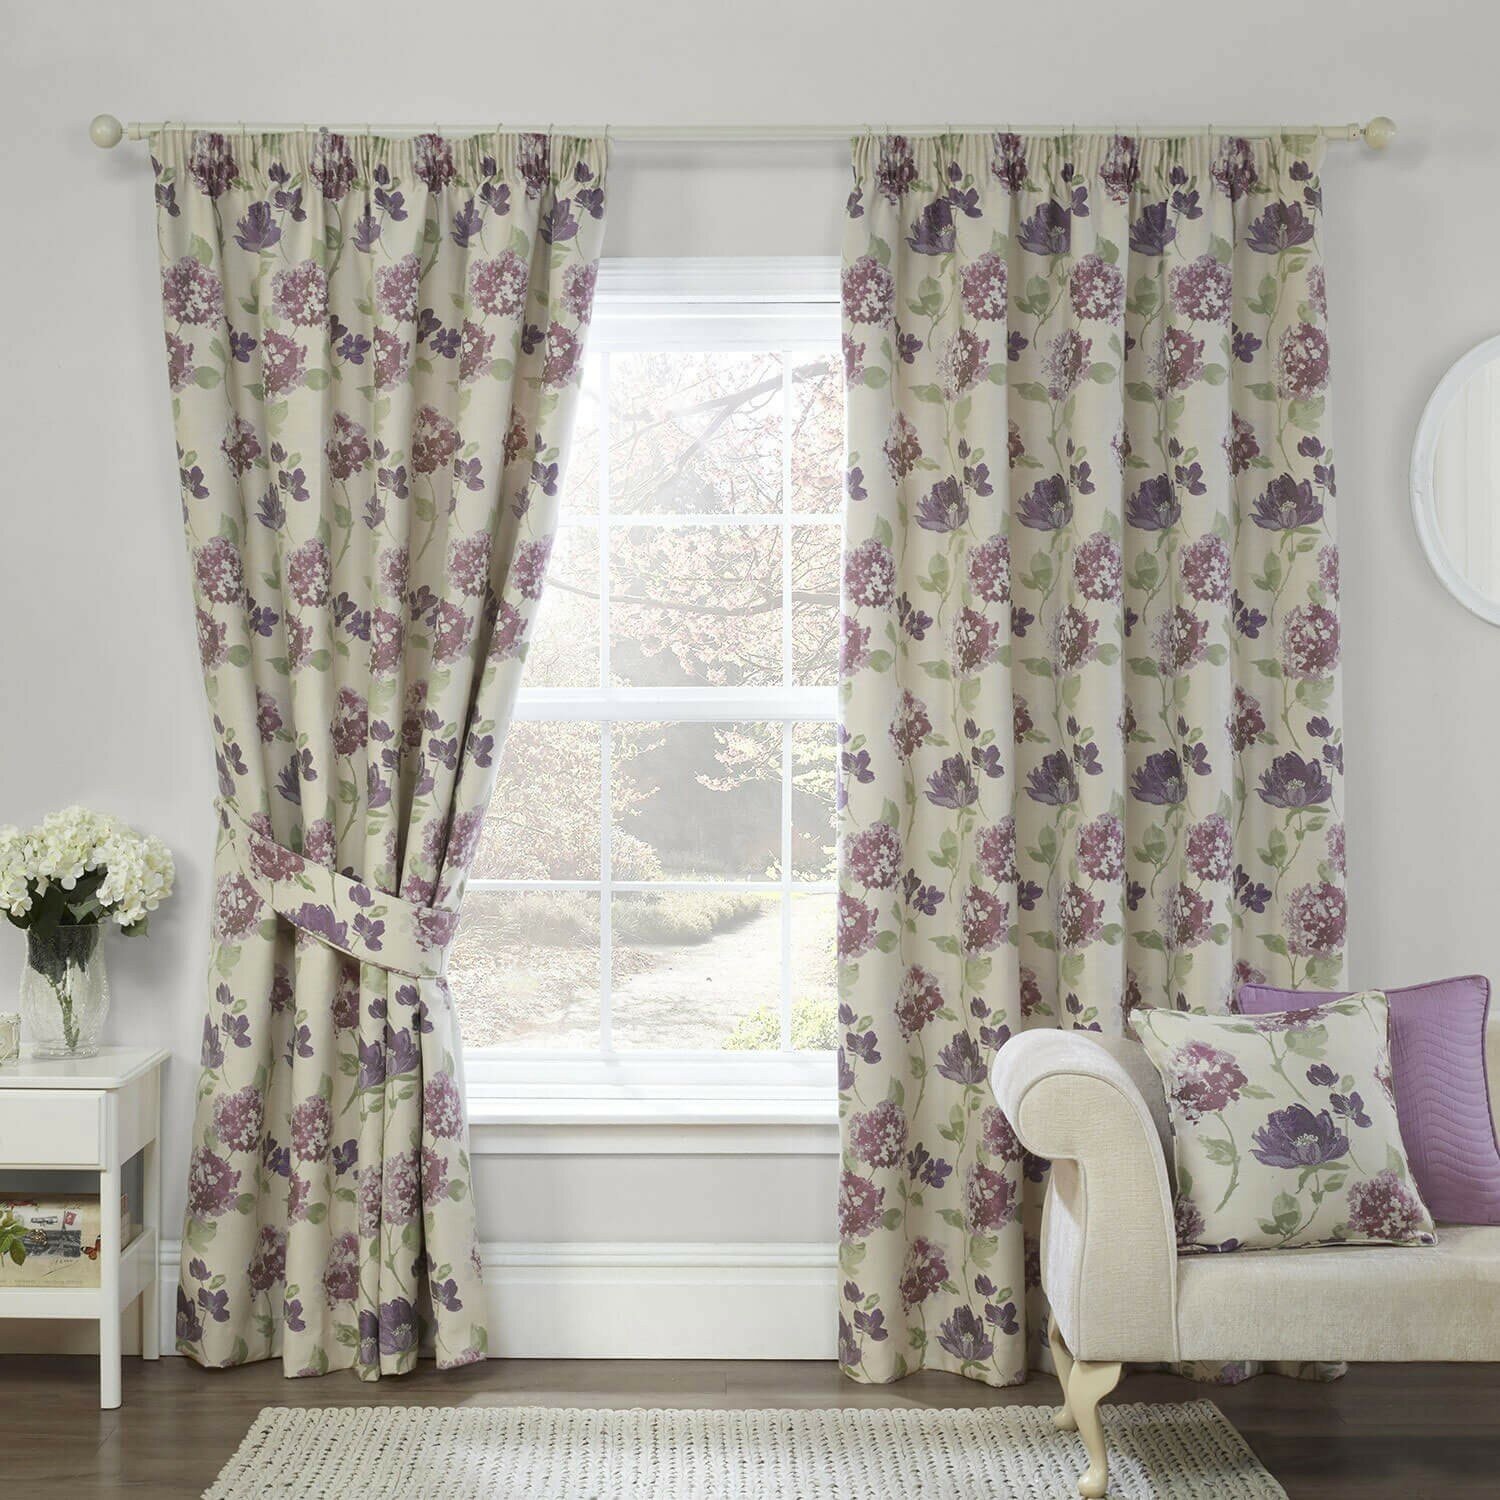 Cheap Blackout Curtains | Blackout Curtains Thermal | Thermal Curtains Clearance